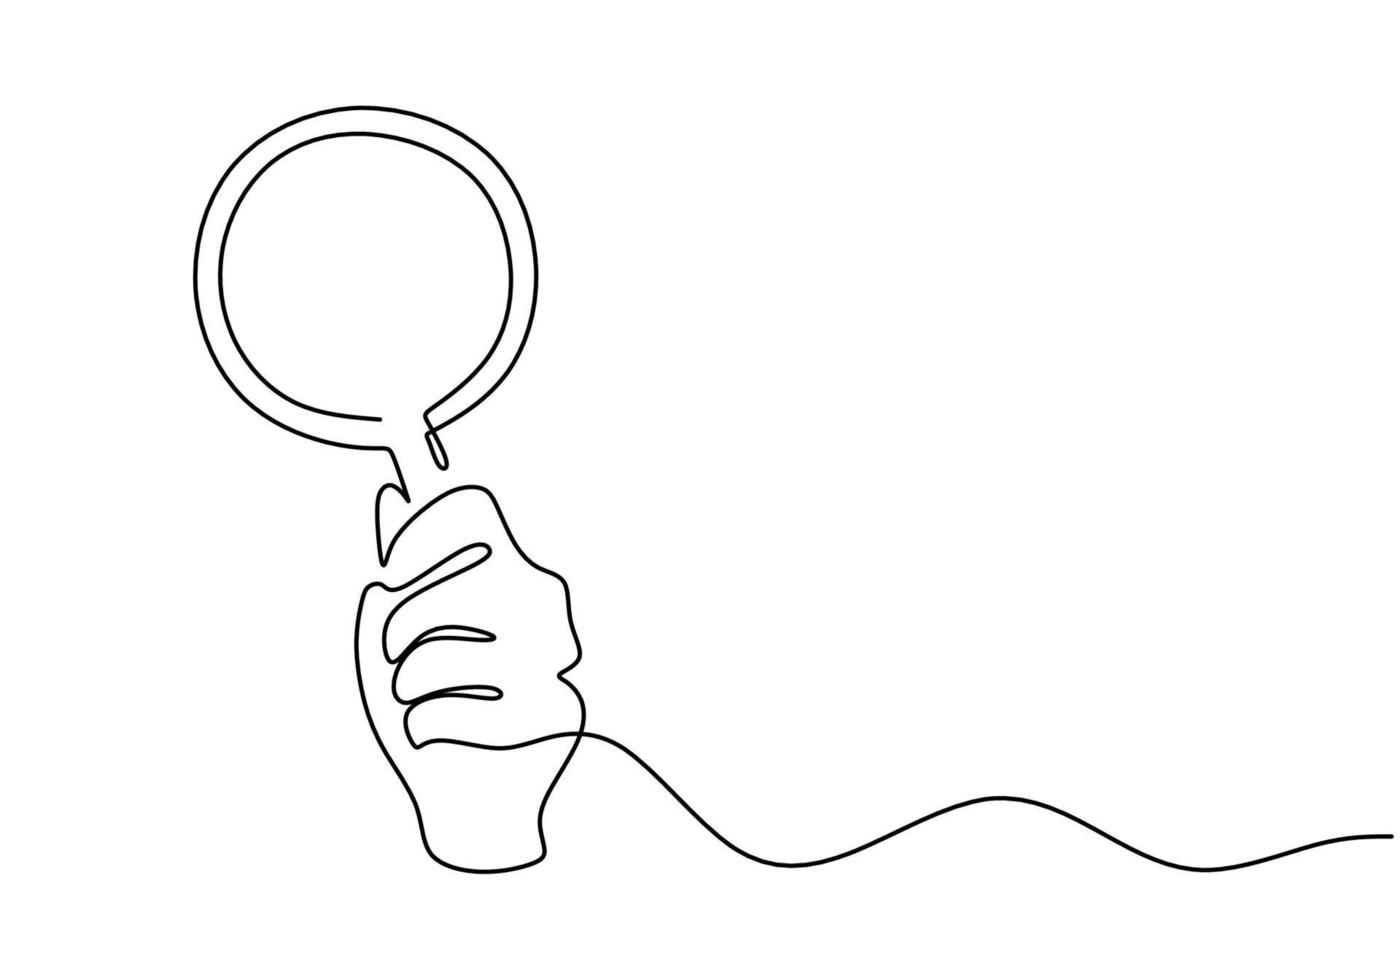 Continuous one single line of hand holding magnifying glass vector